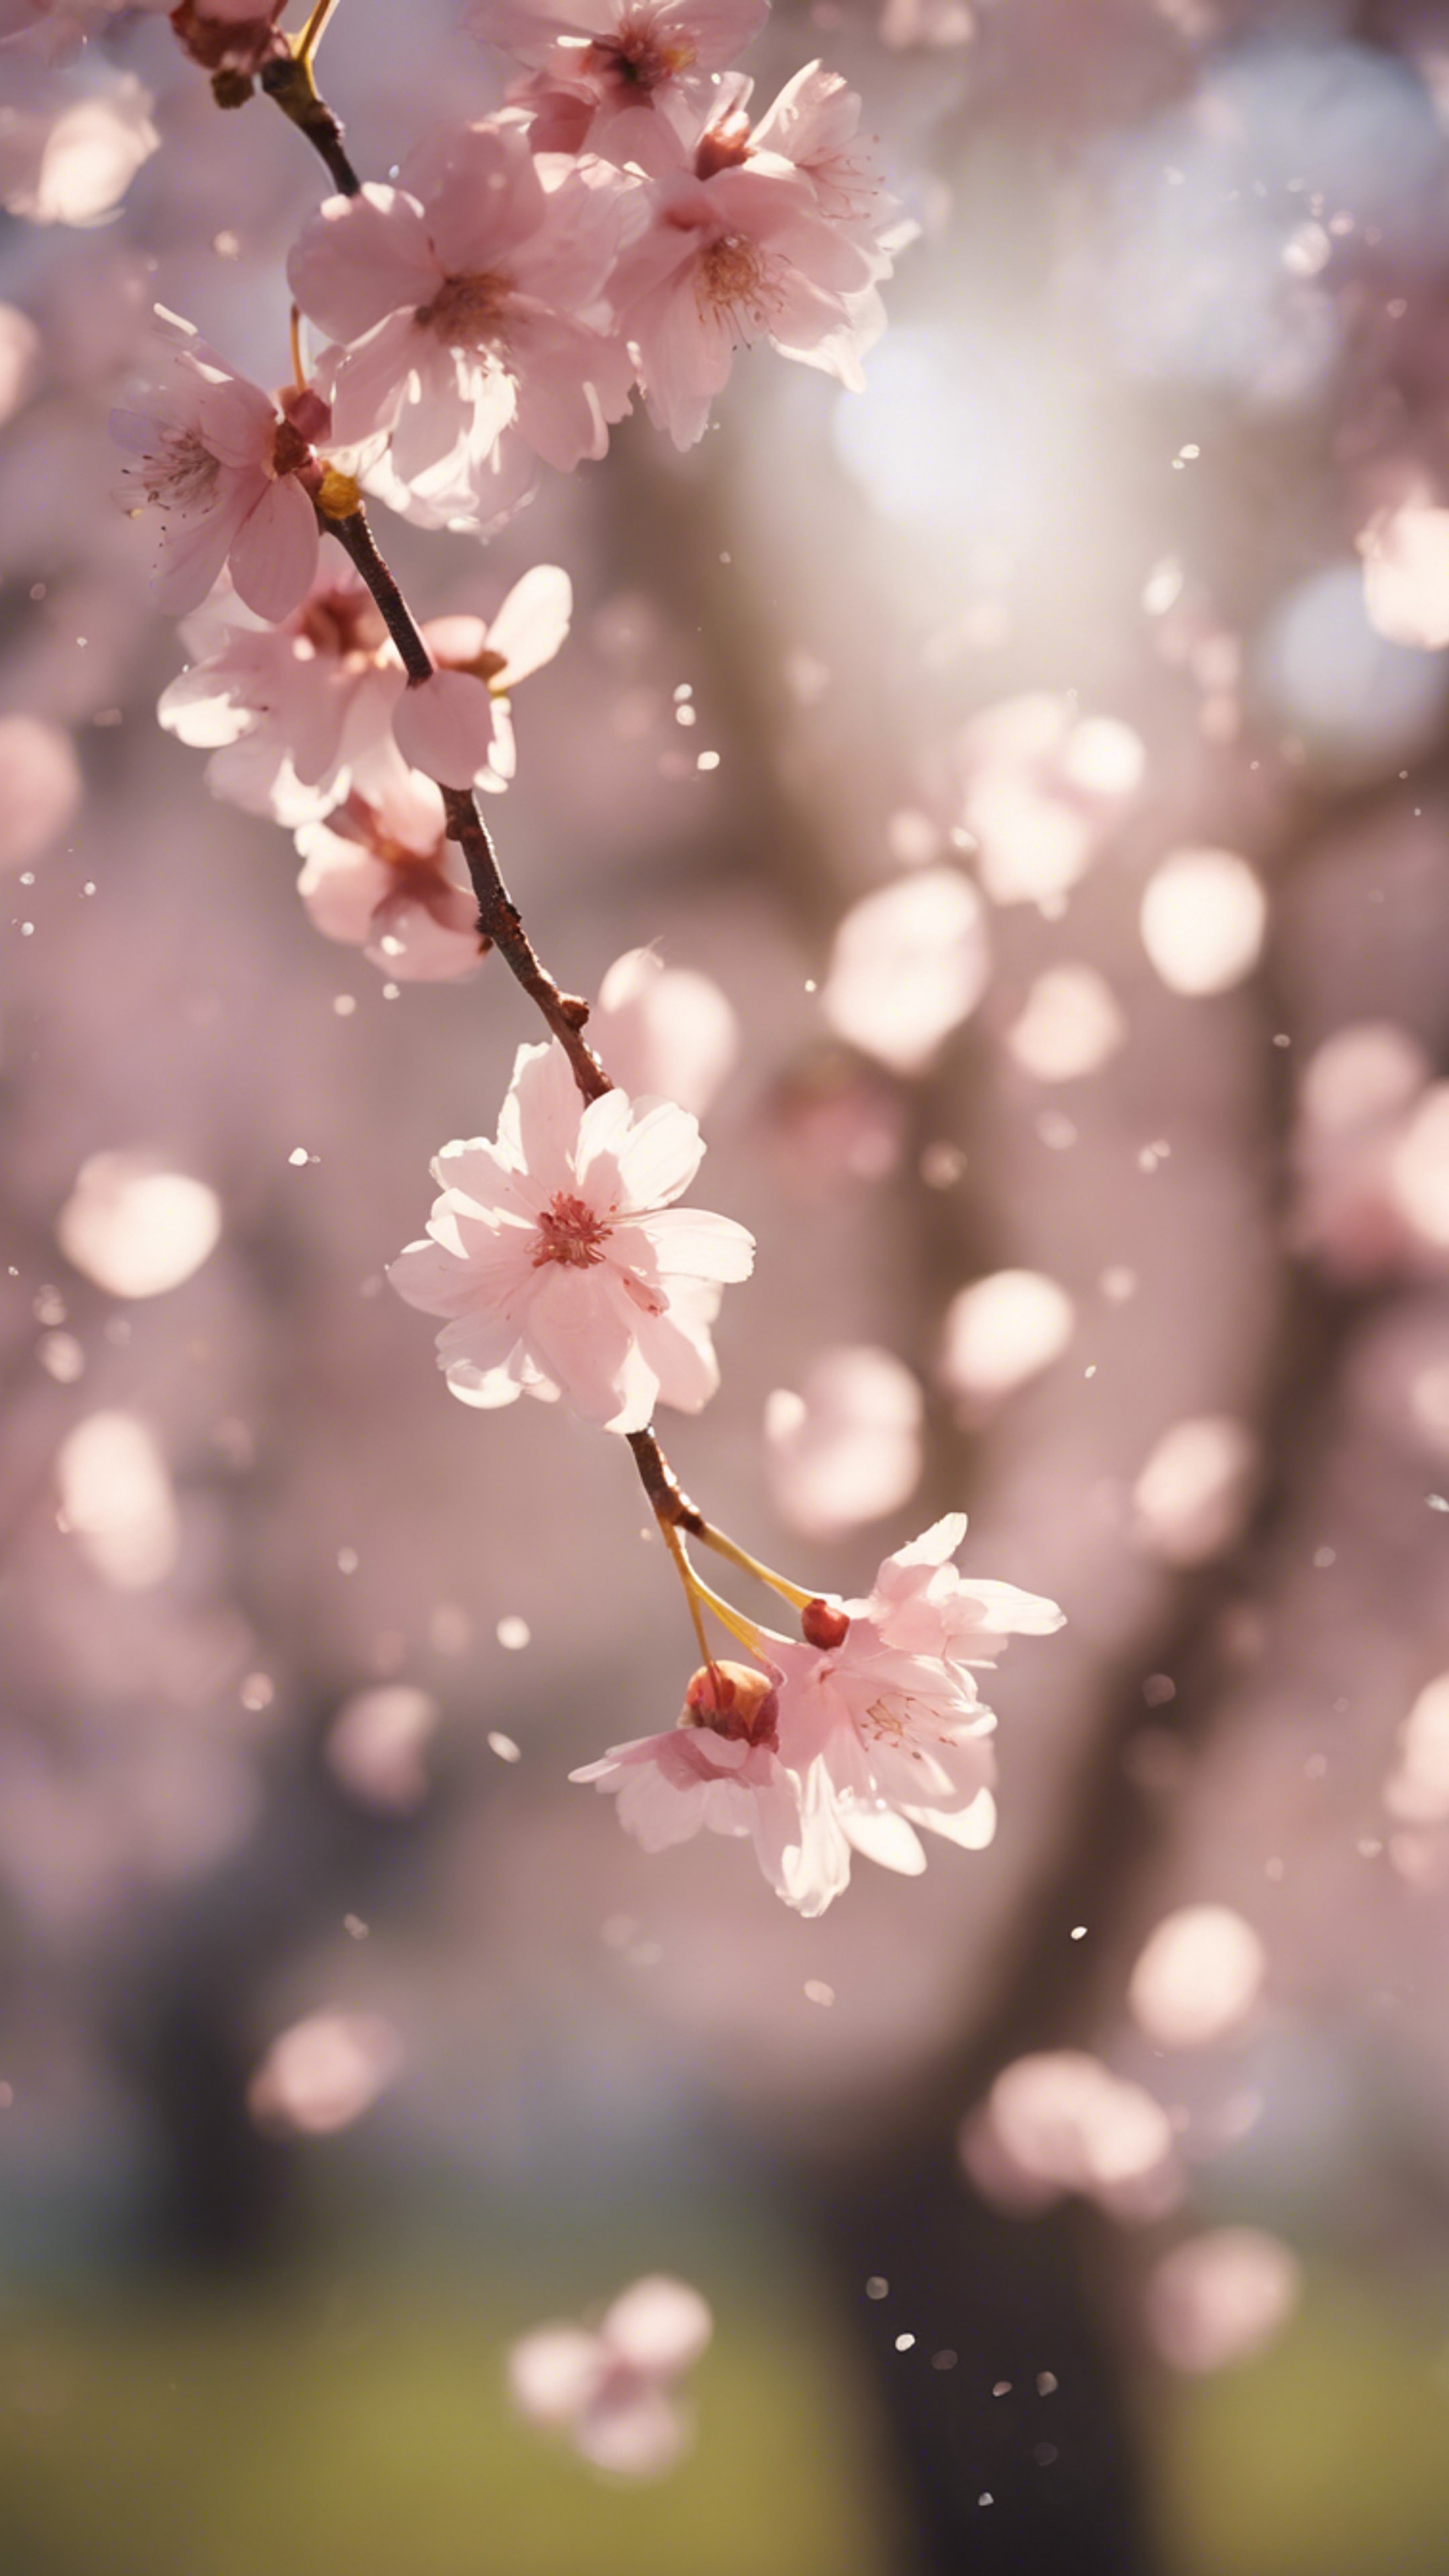 Tiny, light pink cherry blossom petals falling gently from a tree in the morning light. Behang[bcff163445454d48bfbe]